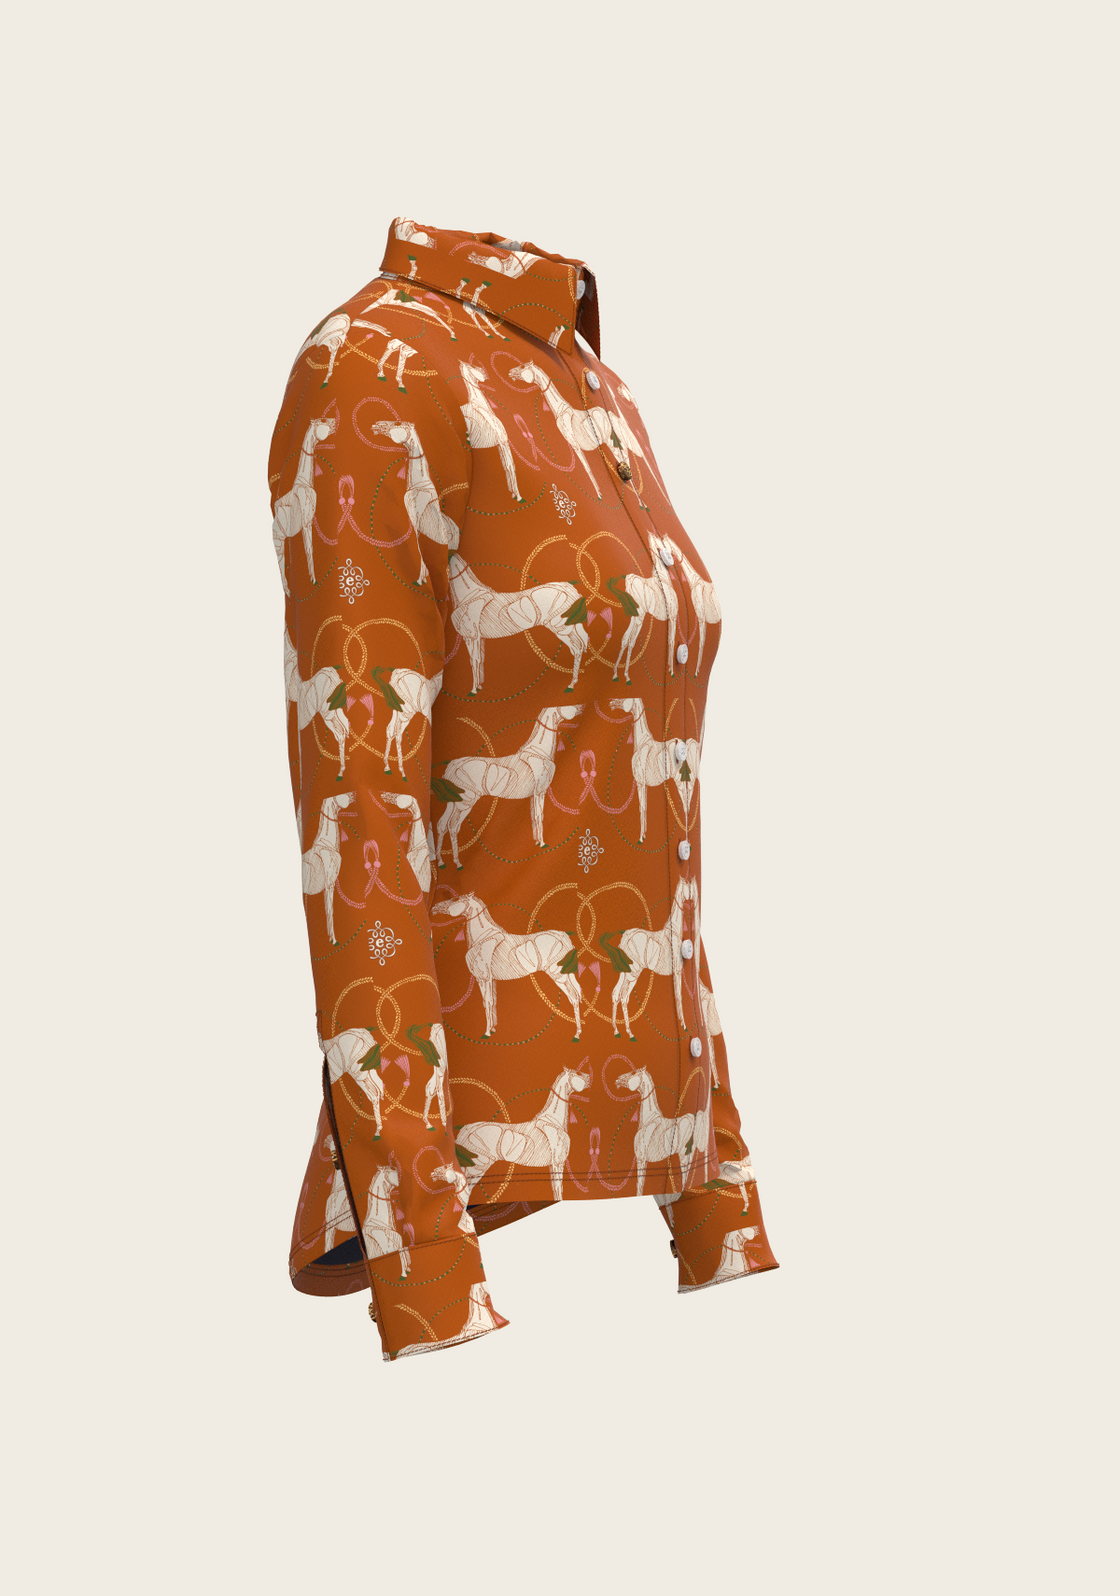 Roped Horses on Tan Ladies Button Shirt